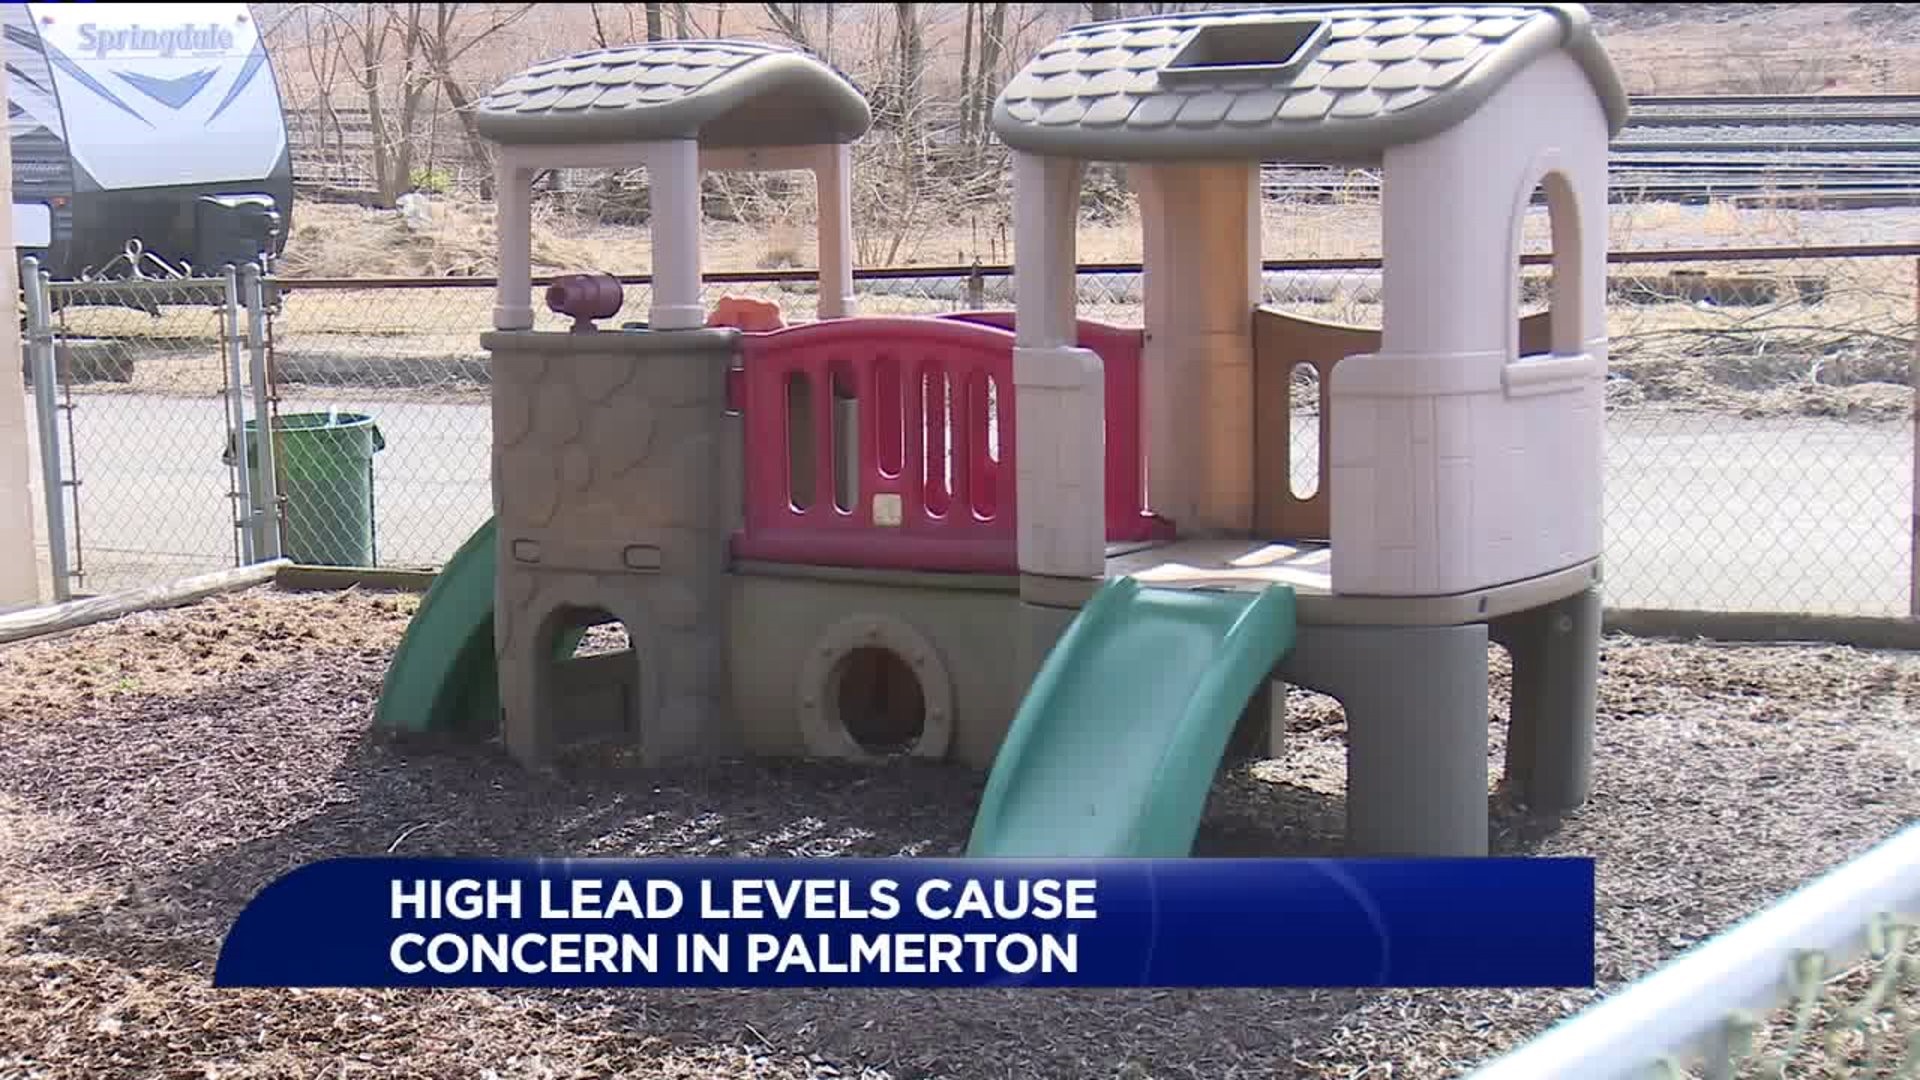 High Lead Levels Cause Concern in Palmerton